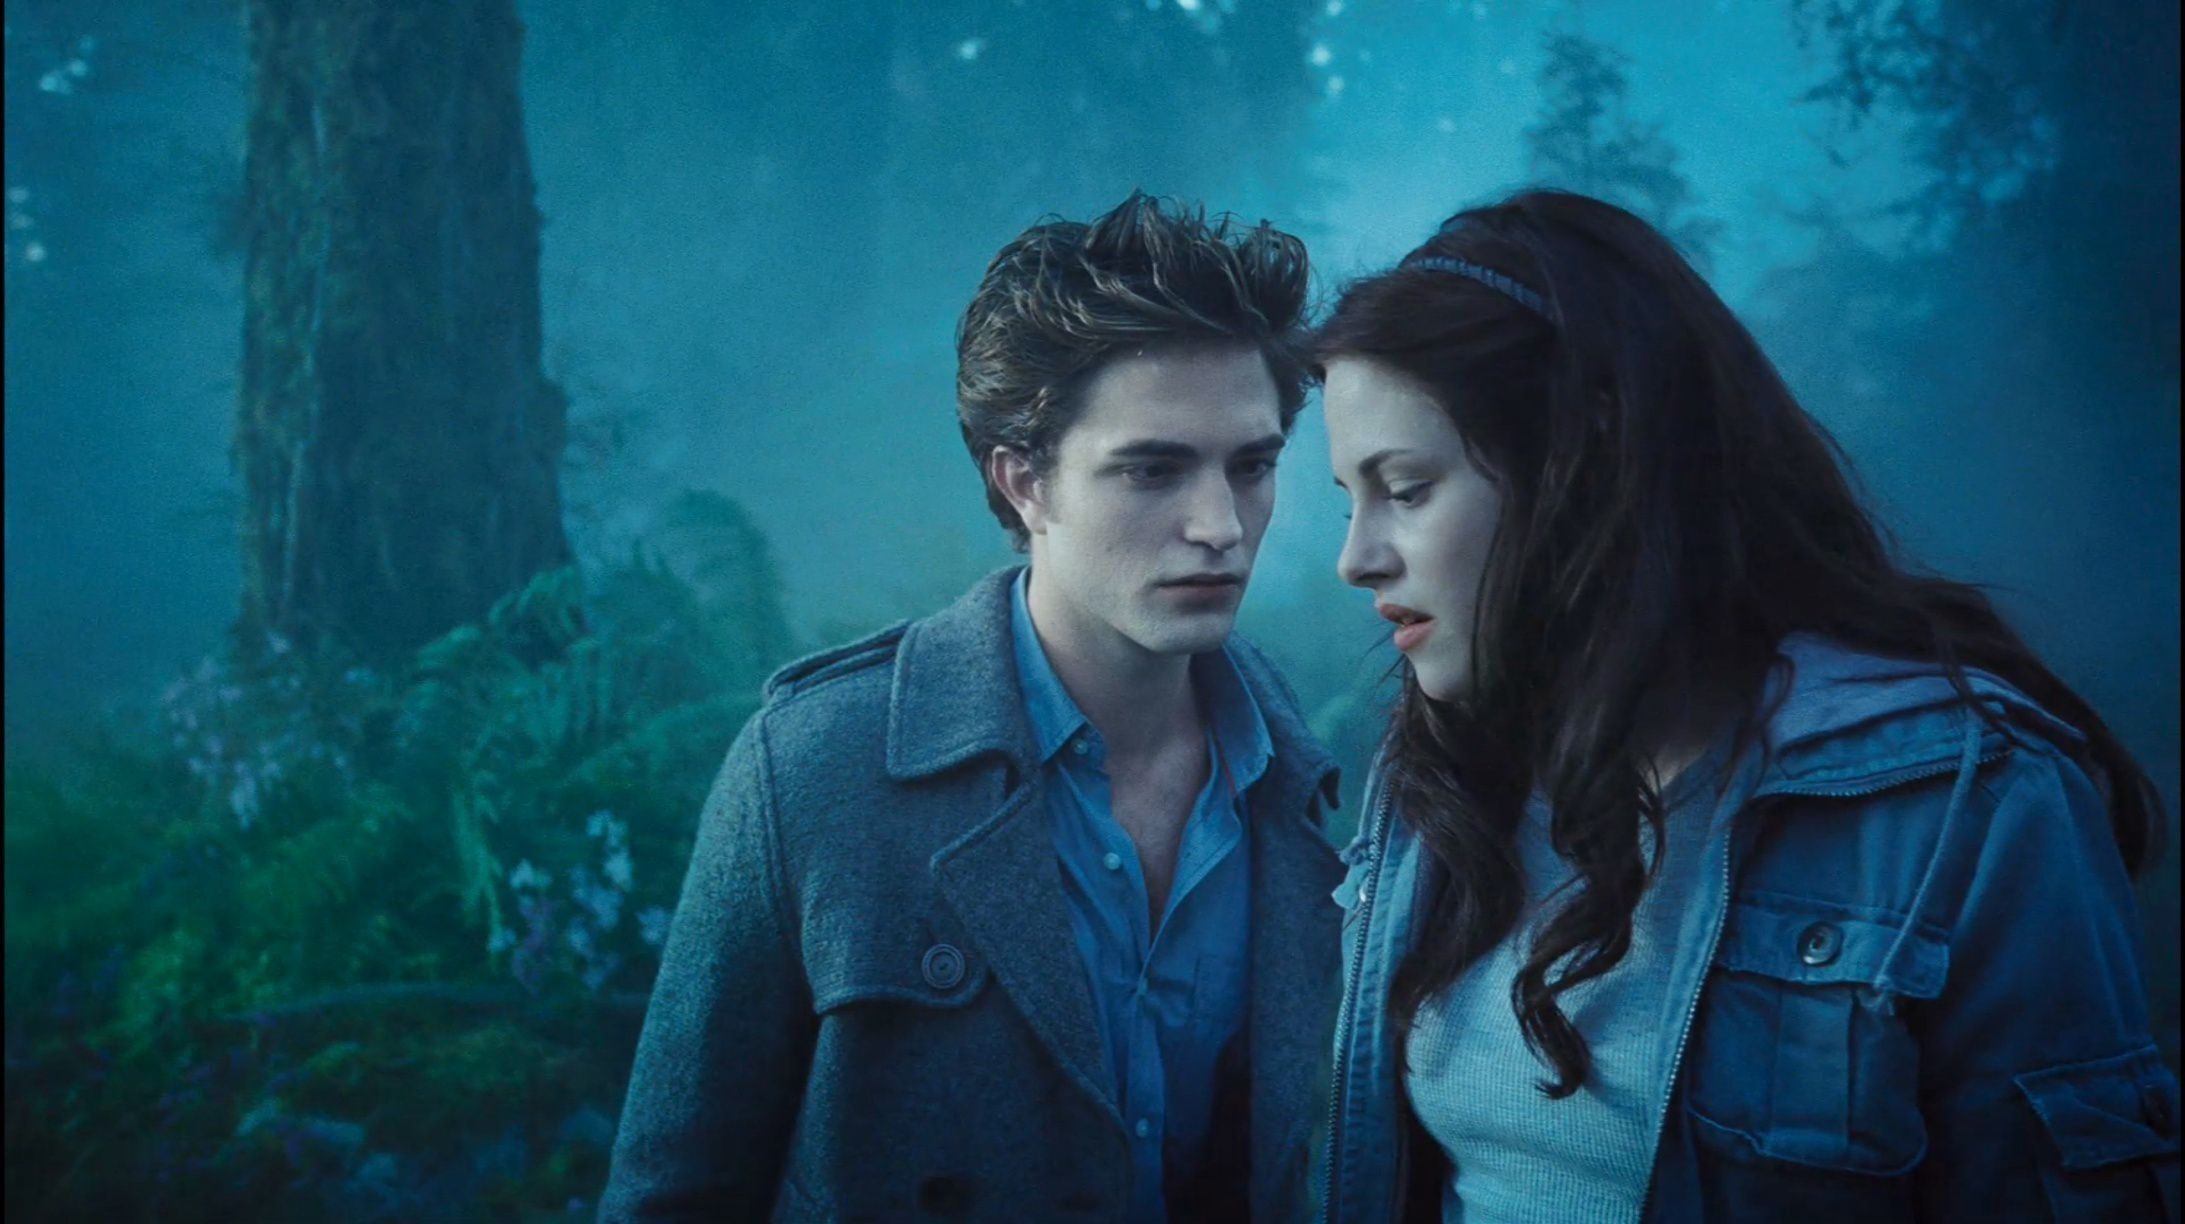 casey la rue recommends Twilight Movies Free Downloads